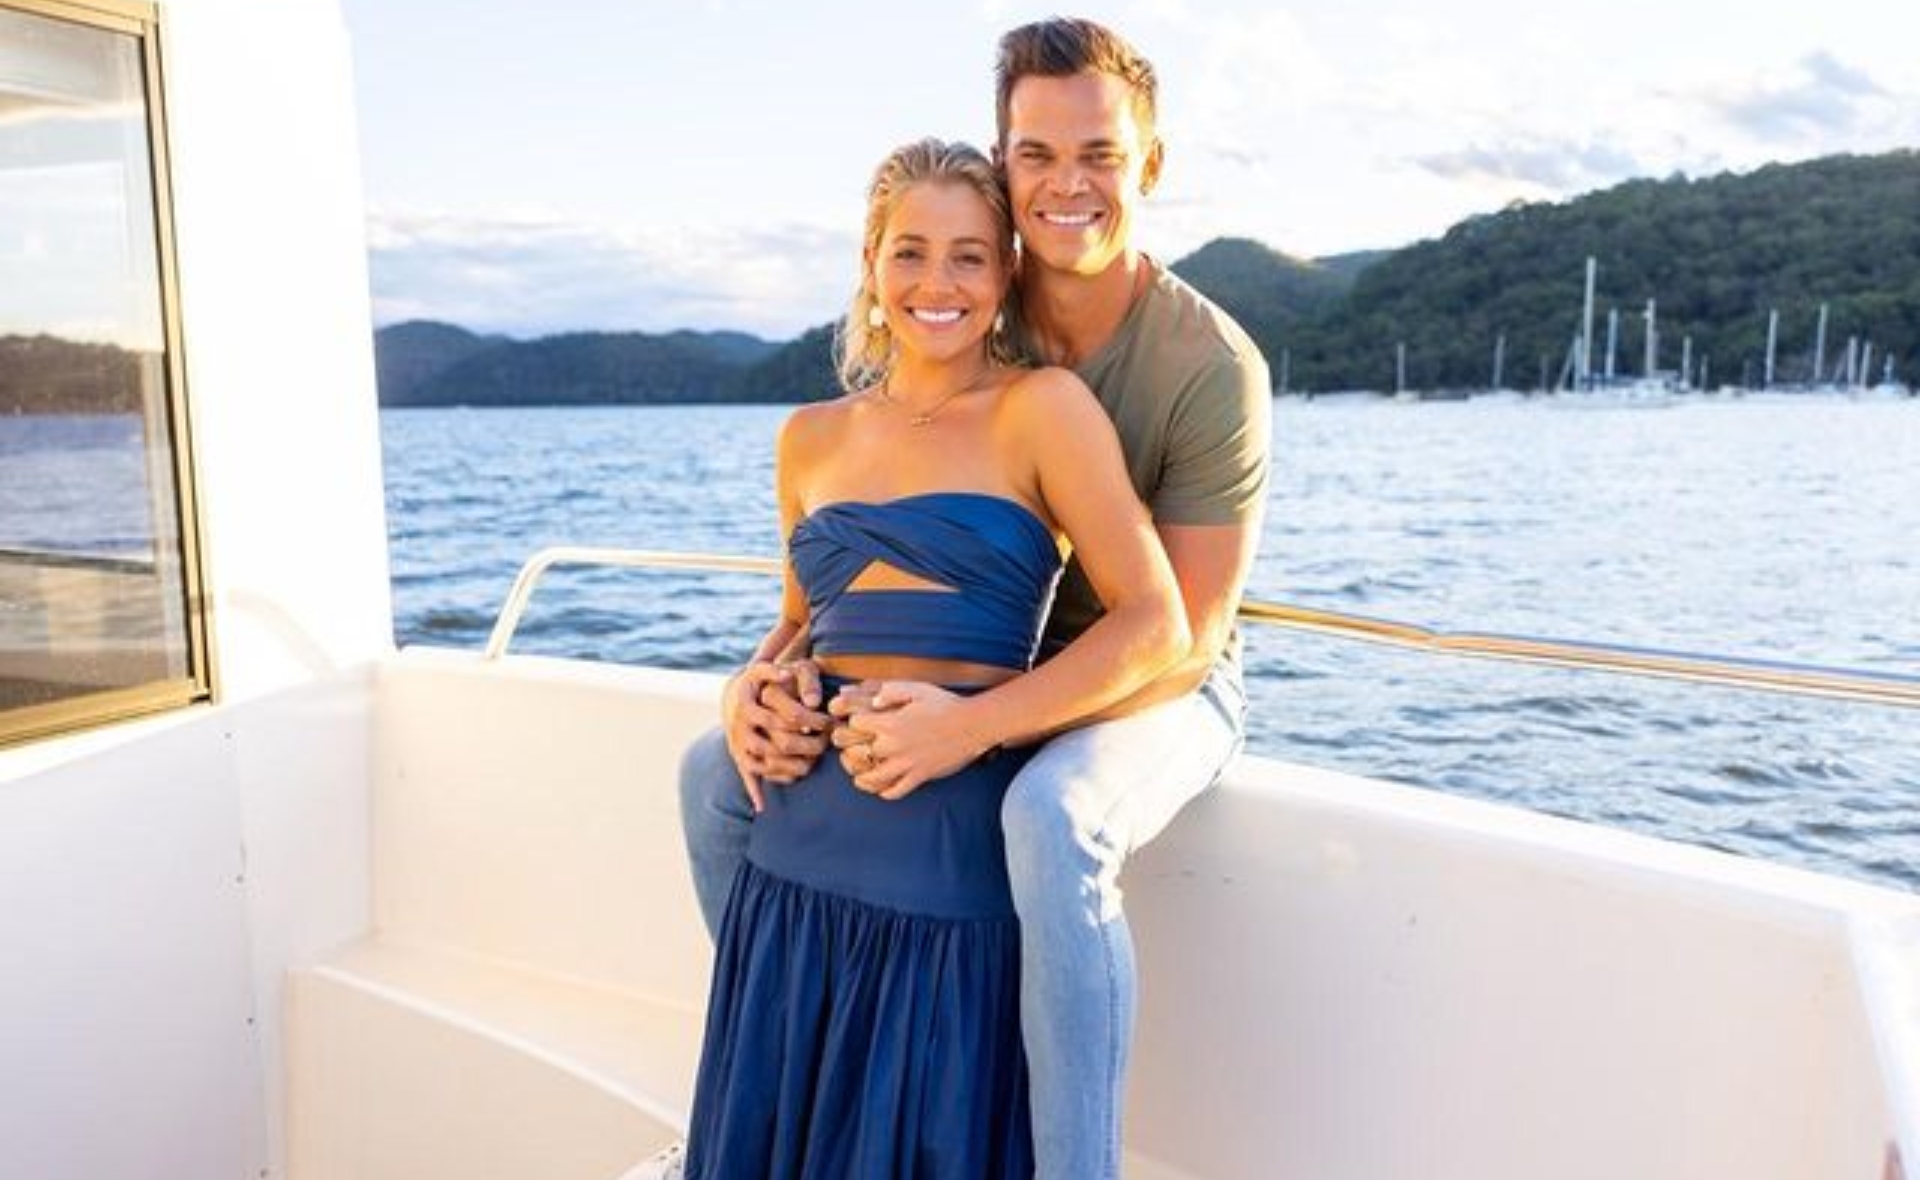 Why Jimmy Nicholson & Holly Kingston Are A Textbook ‘Bachelor’ Relationship